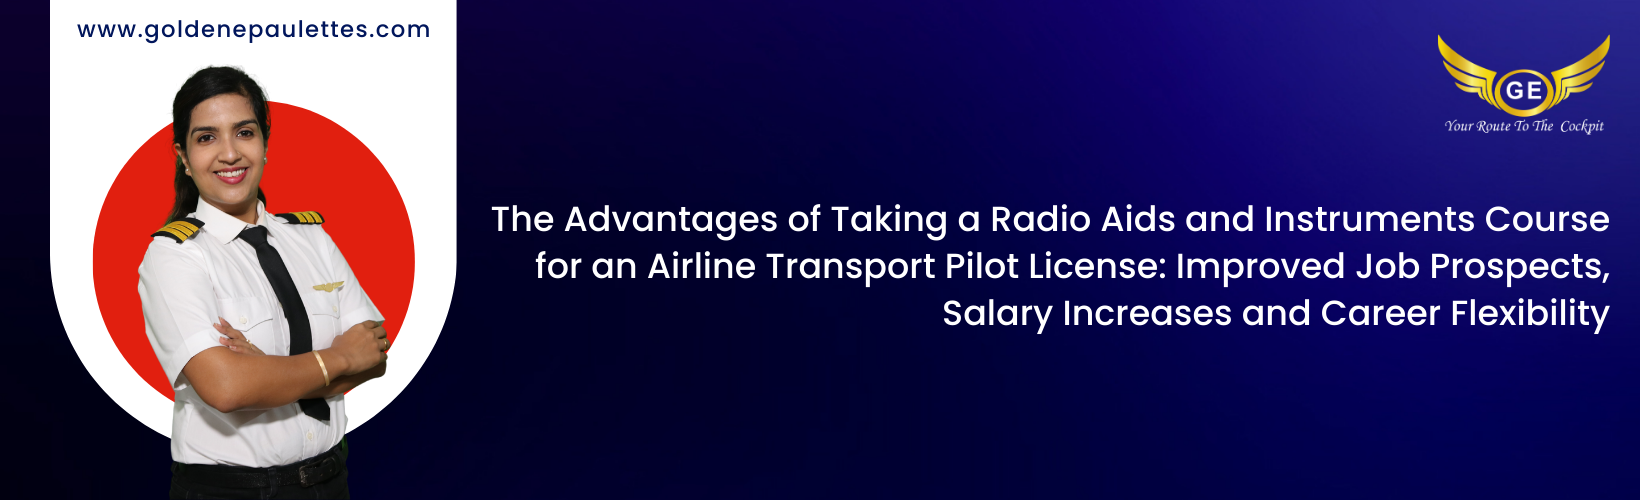 Career Opportunities After Completing the Radio Aids and Instruments Course in Airline Transport Pilot License